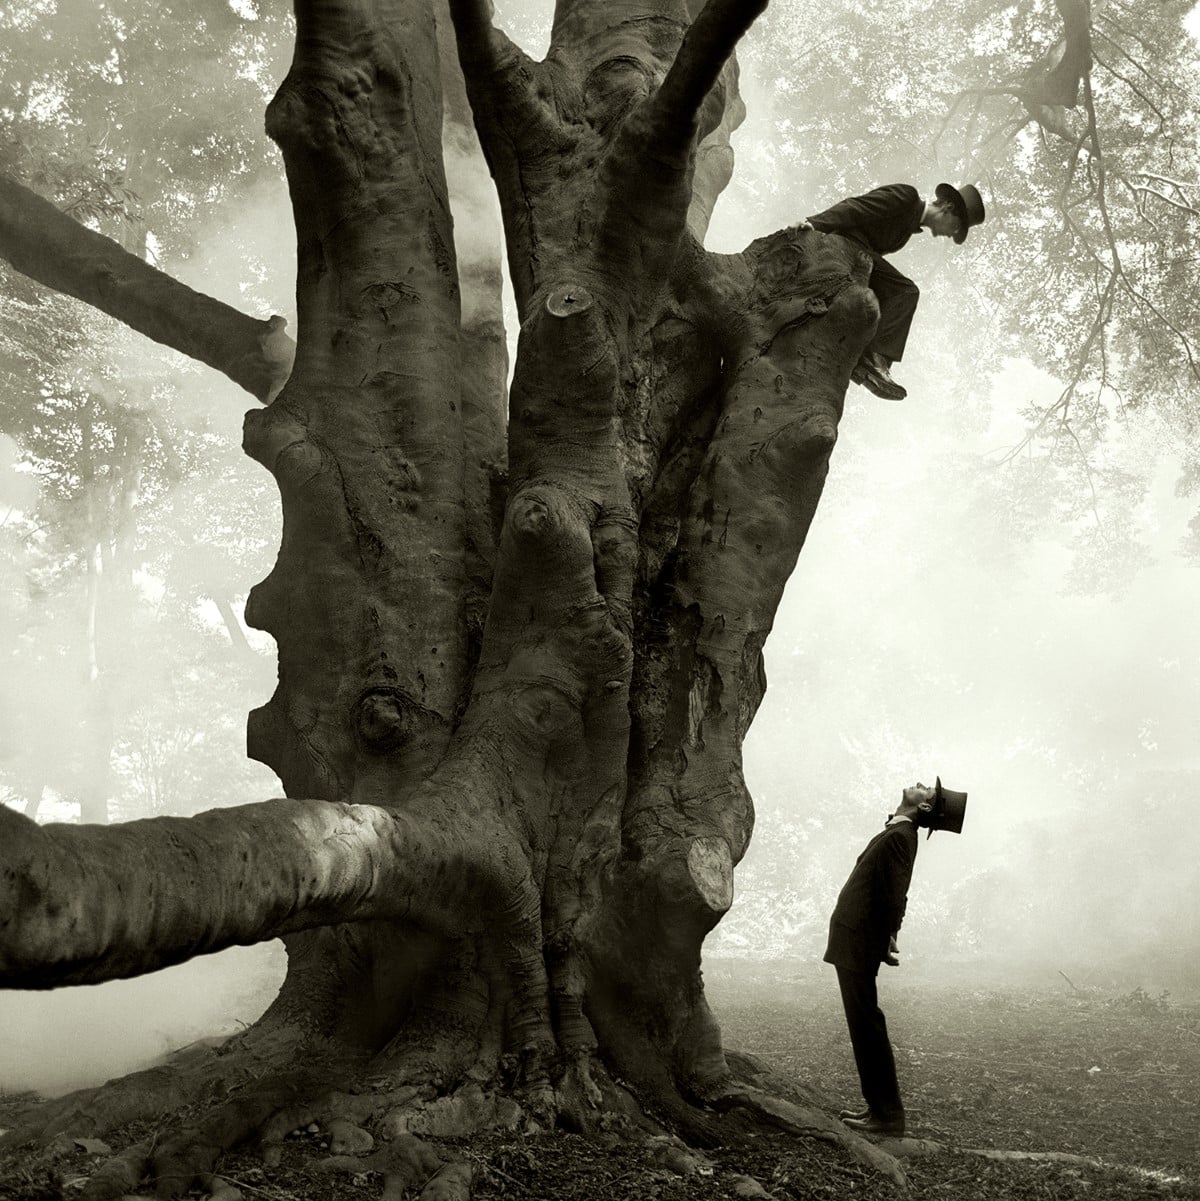 Twins in the Tree by Rodney Smith